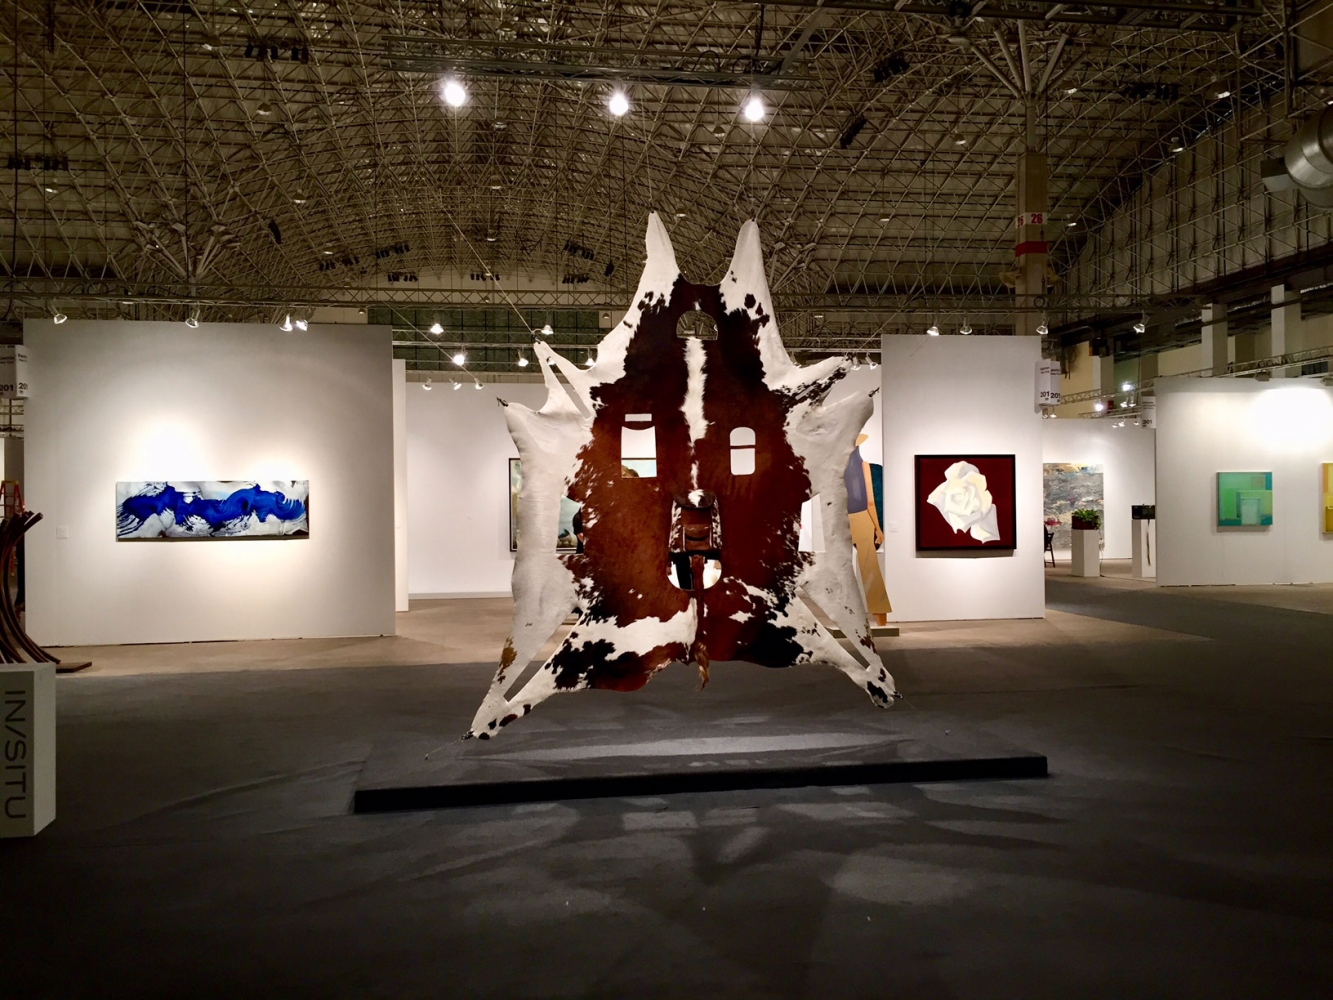 Luhring Augustine
EXPO Chicago,&amp;nbsp;In/Situ
Installation view
2019